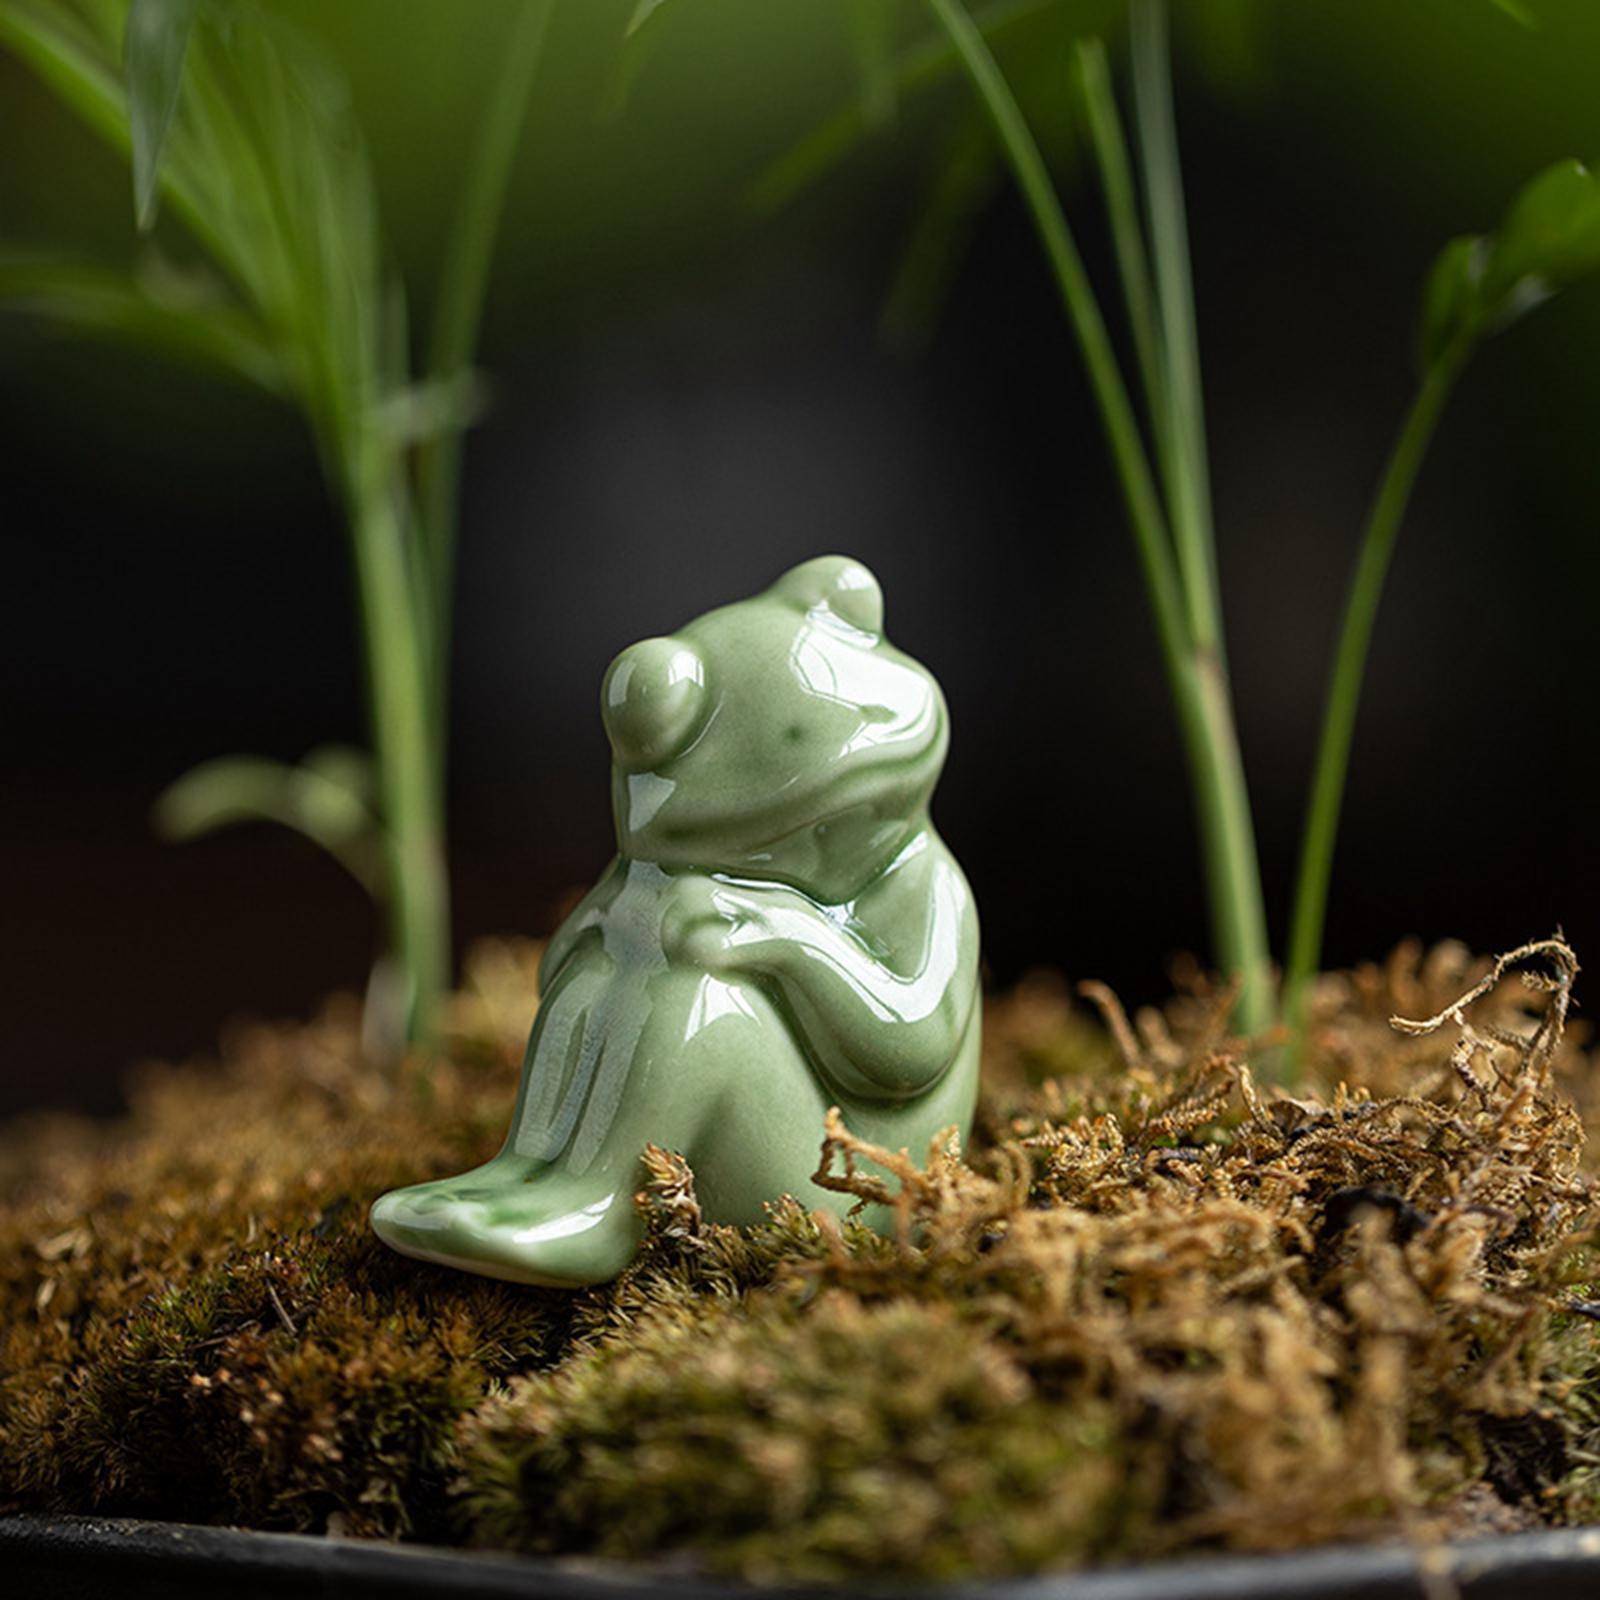 Miniature Frog Figurine Tea Pet Sculpture Small Frog Statue for Table Office StyleB 4.5x3.2x5.7cm